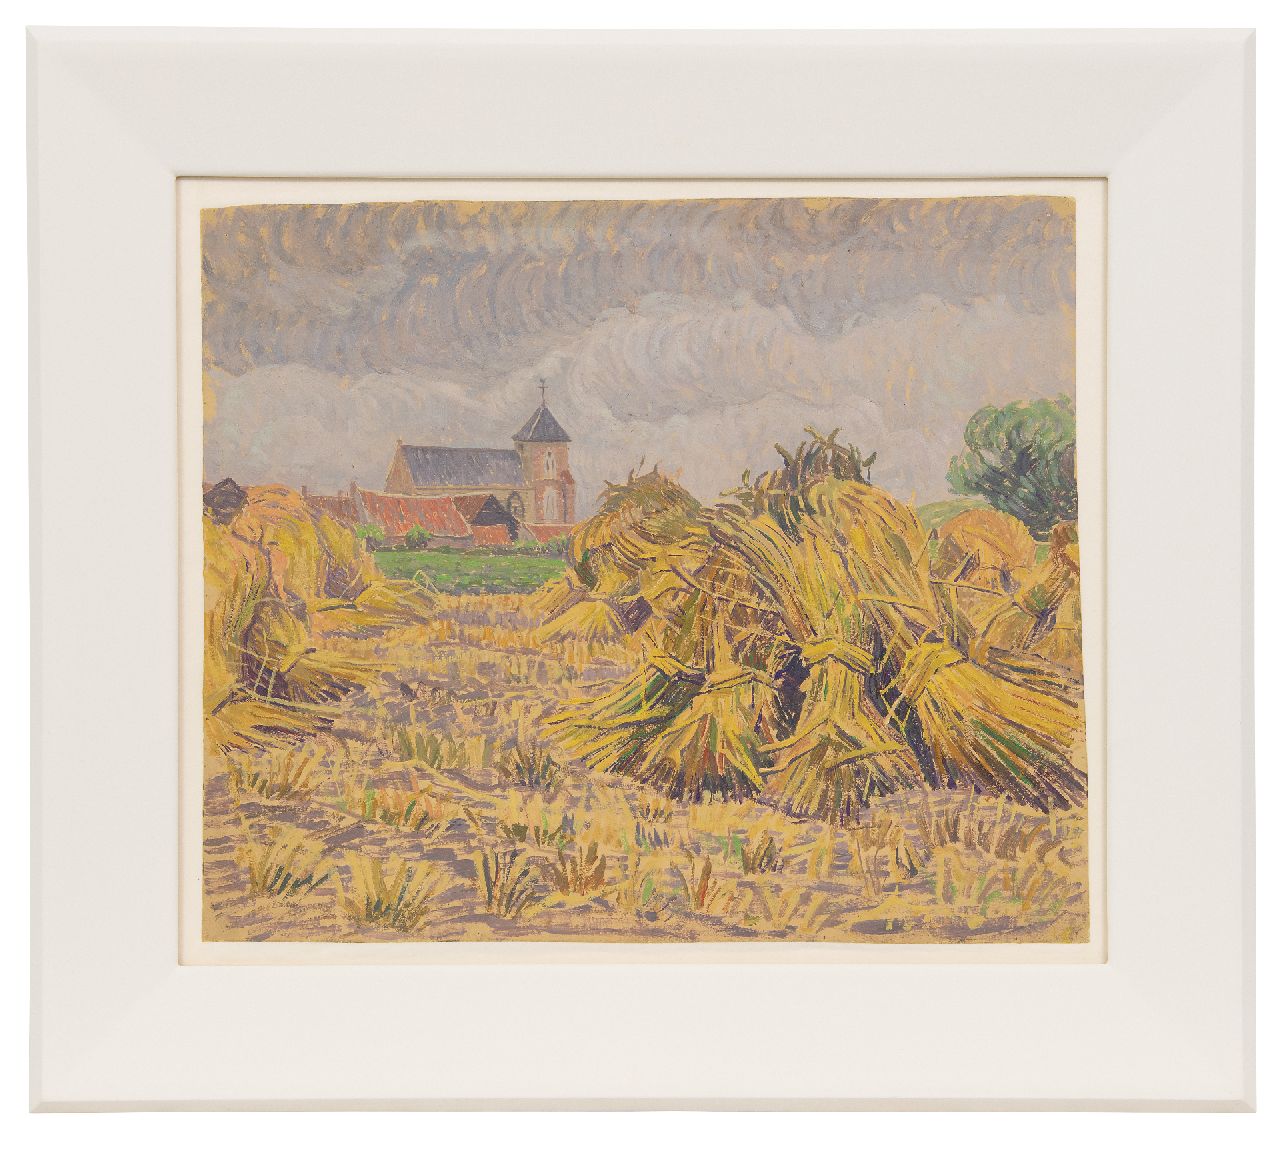 Pijpers E.E.  | 'Edith' Elizabeth Pijpers | Paintings offered for sale | A village church betweencornfields, oil on paper 38.1 x 48.5 cm